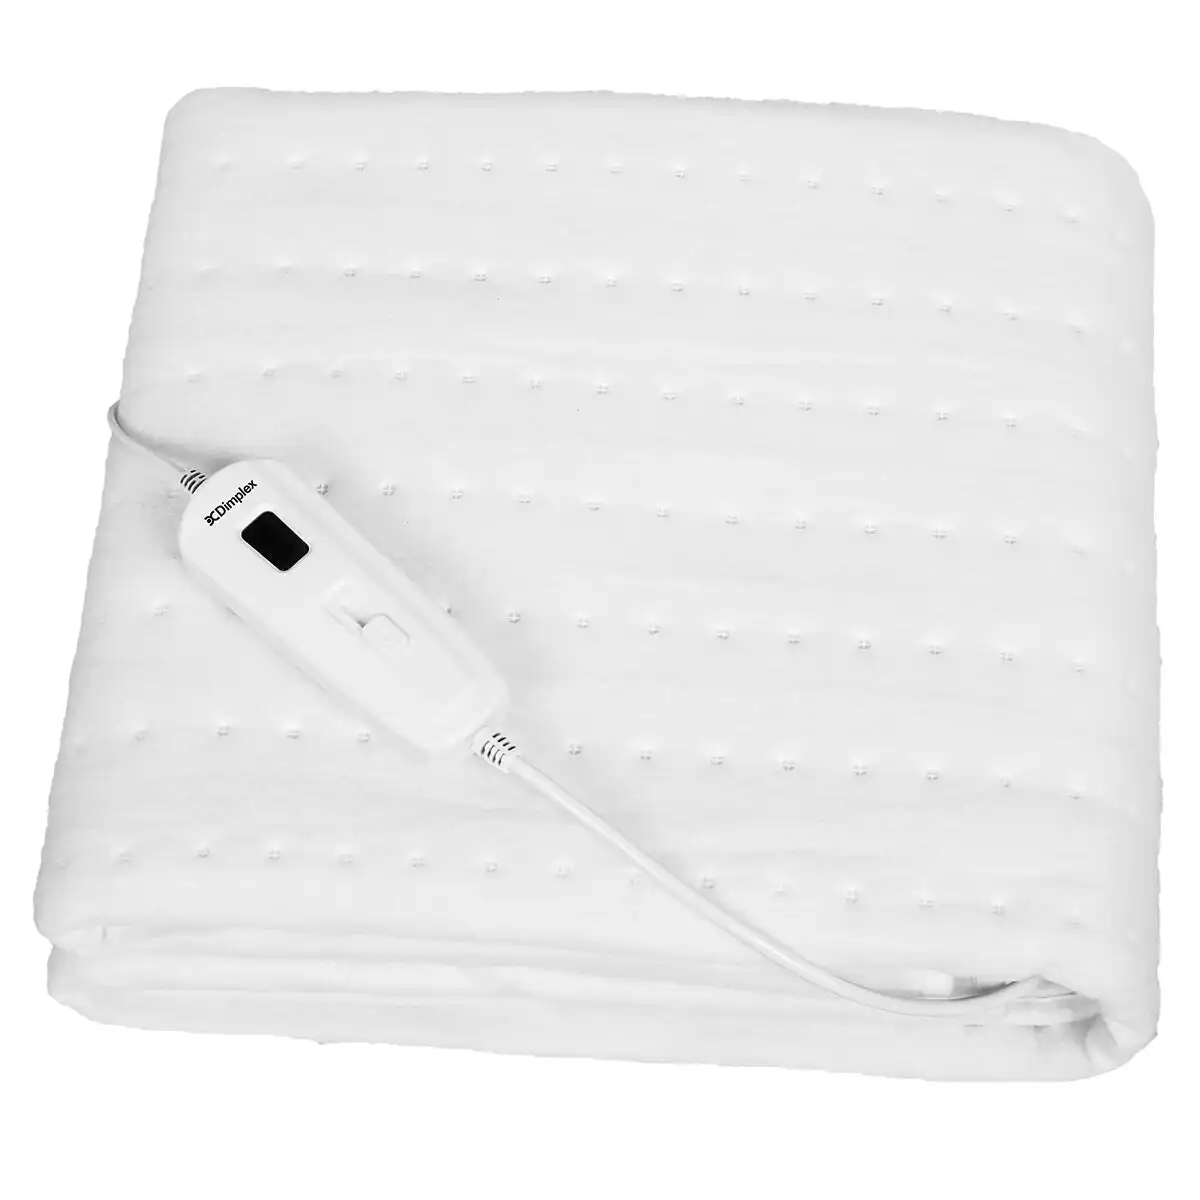 Dimplex King Single Fitted Electric Blanket